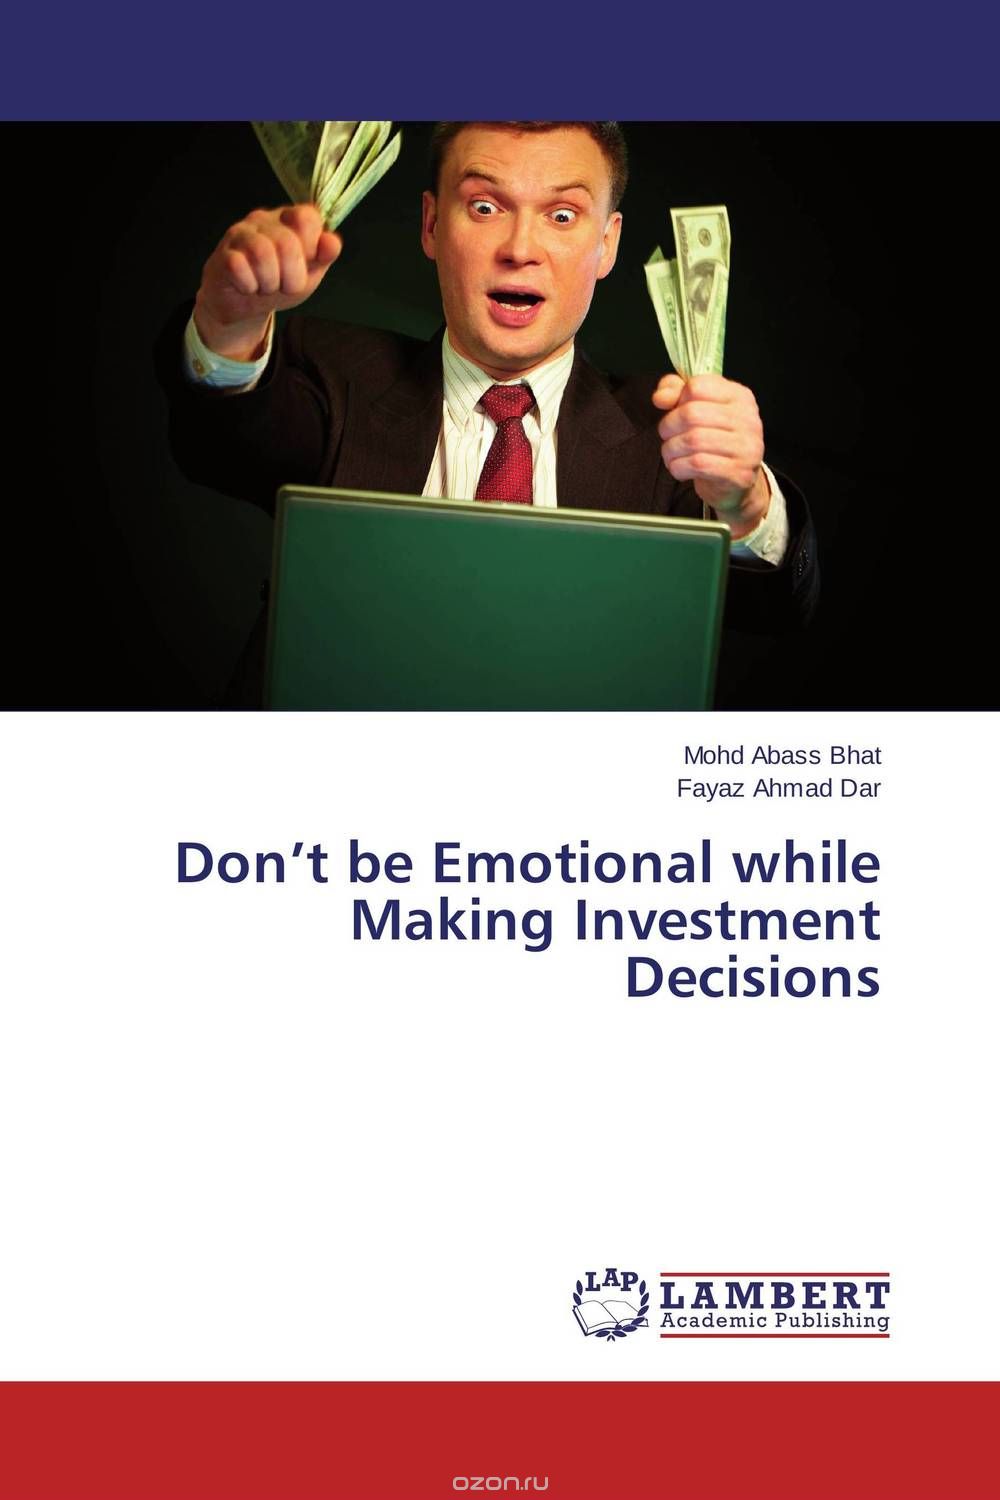 Скачать книгу "Don’t be Emotional while Making Investment Decisions"